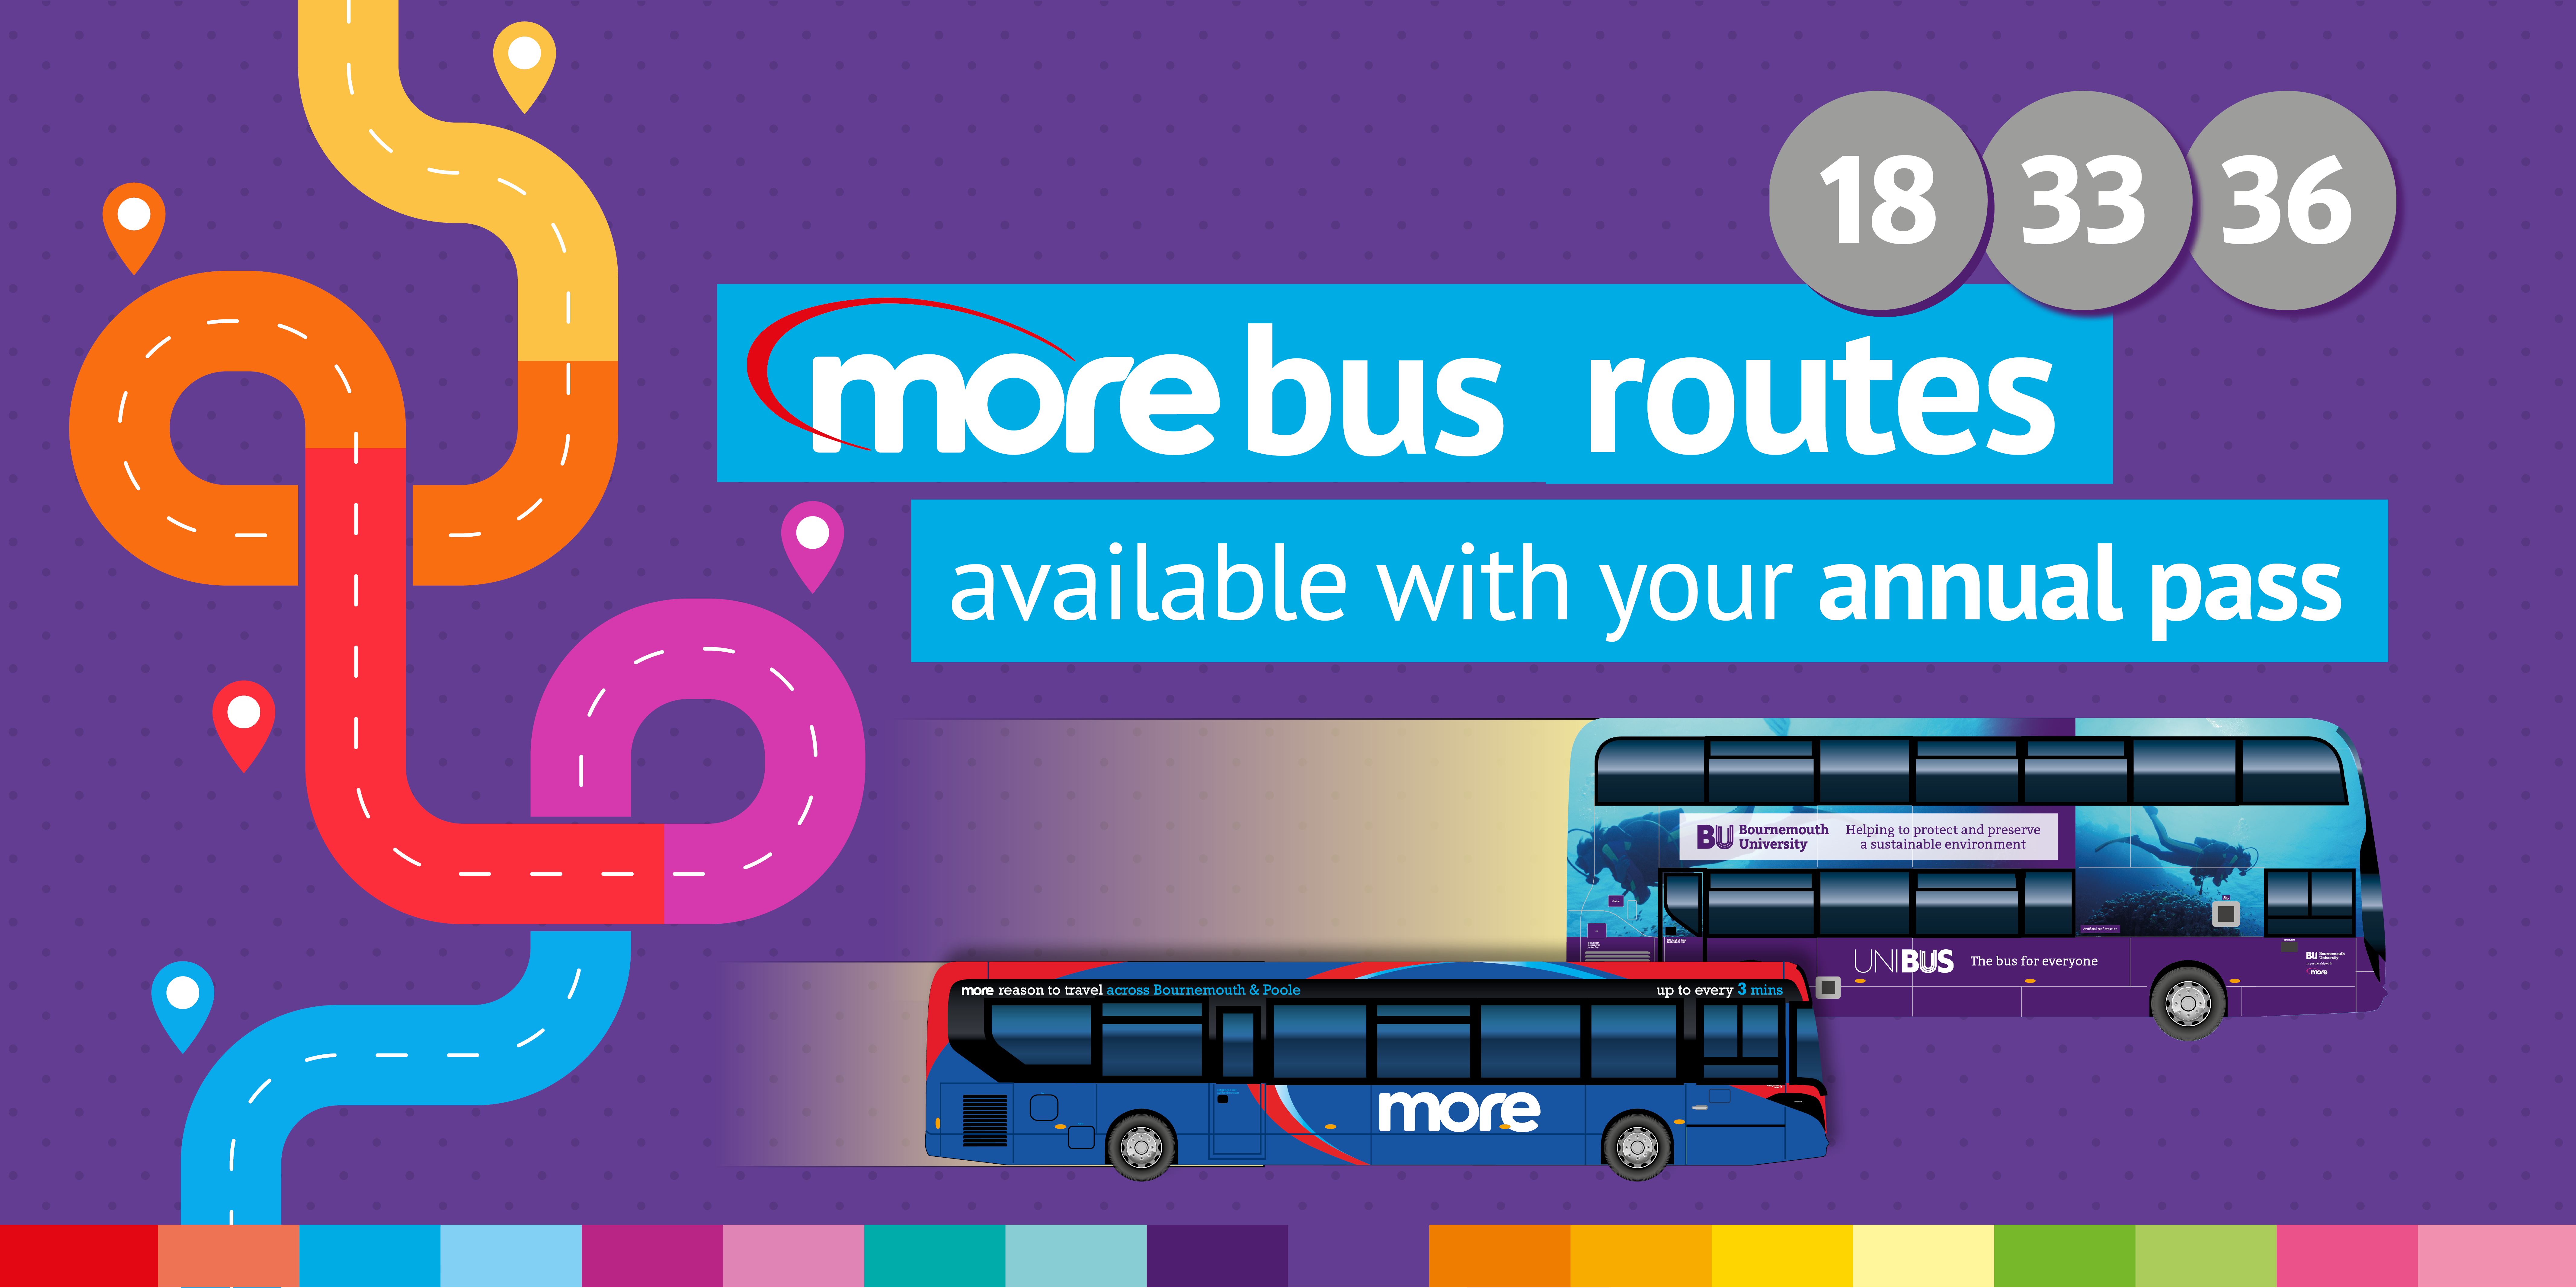 18, 33 & 36 morebus routes available with your annual pass image